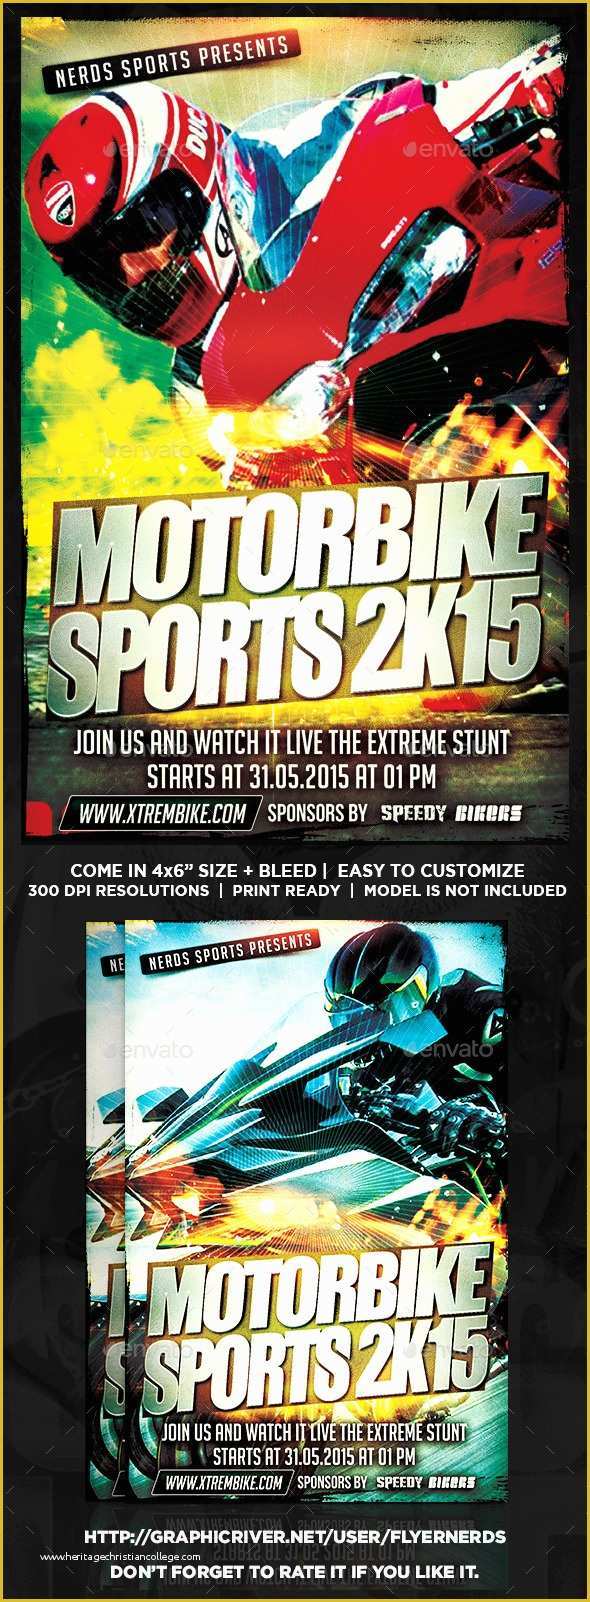 Free Motorcycle Ride Flyer Template Of Free to Print Motorcycle Ride Flyers Dolunai